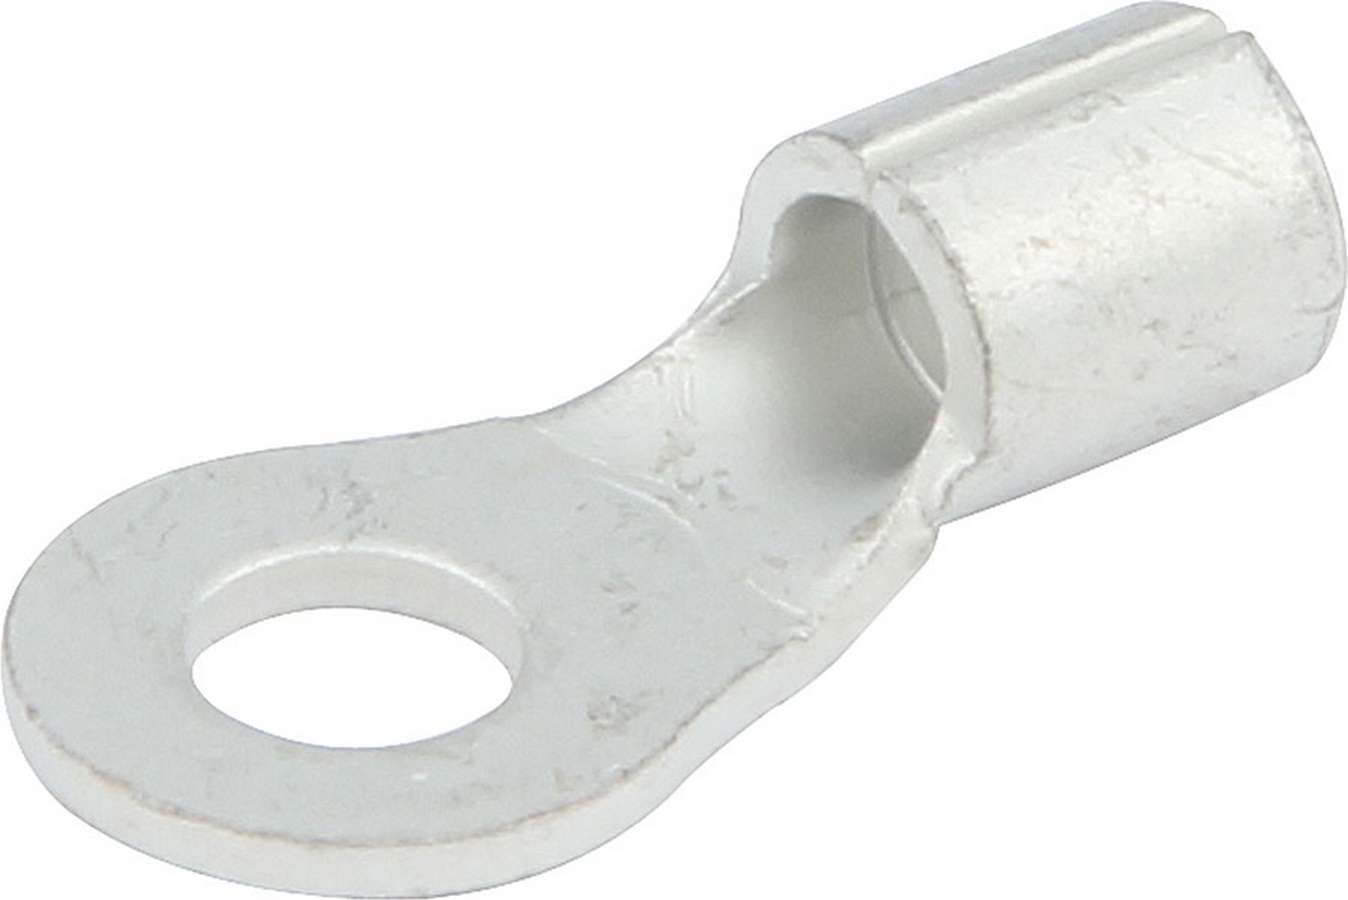 Ring Terminal #8 Hole Non-Insulated 12-10 20pk